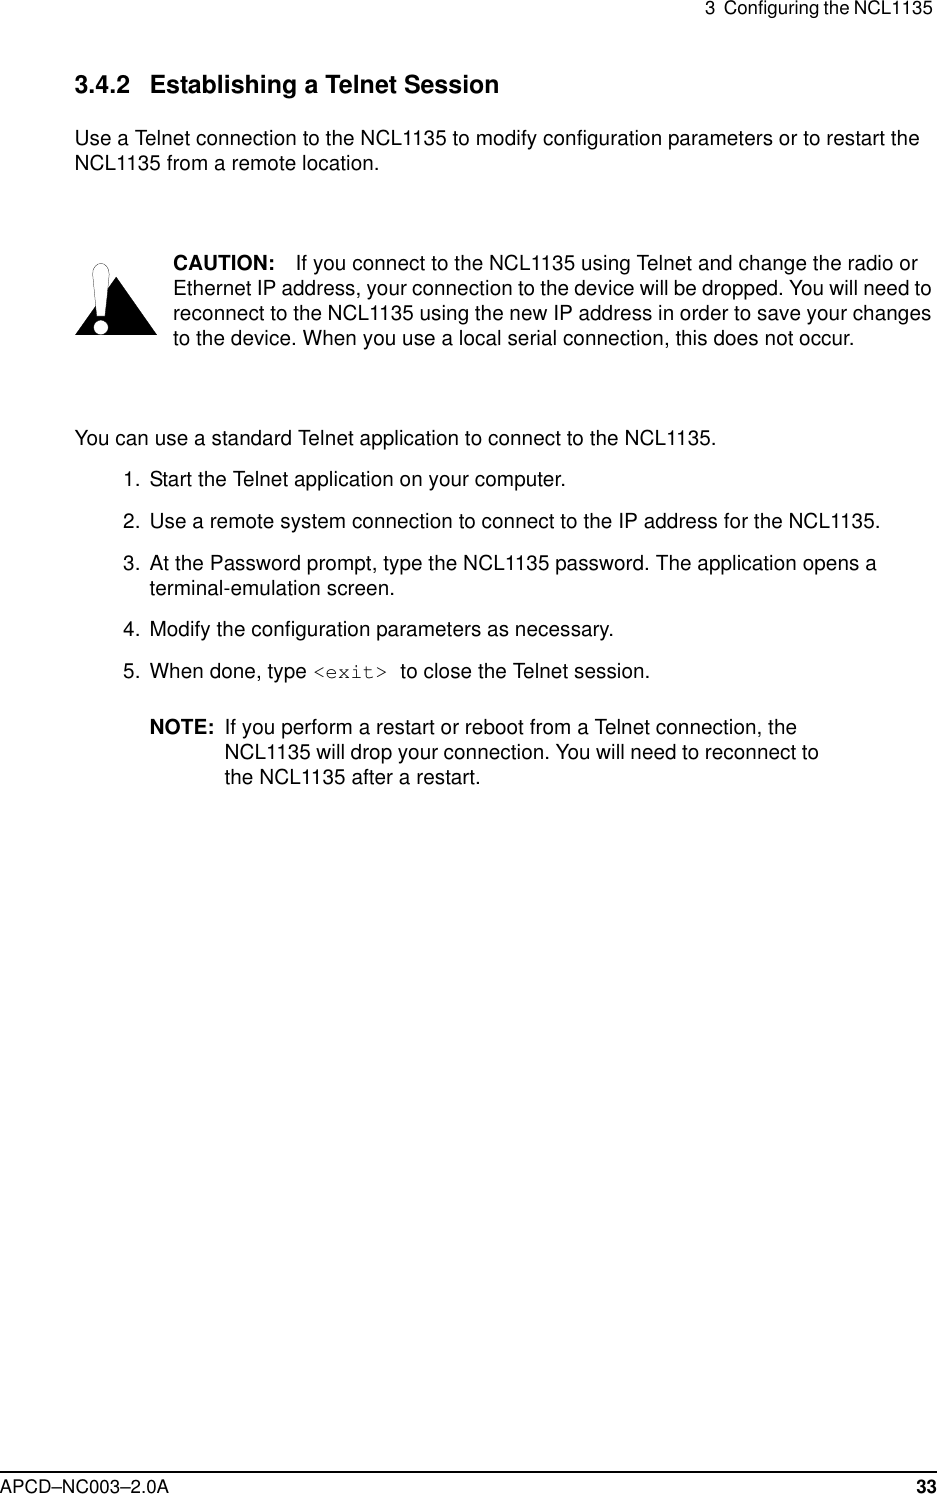 3  Configuring the NCL1135 APCD–NC003–2.0A 333.4.2 Establishing a Telnet SessionUse a Telnet connection to the NCL1135 to modify configuration parameters or to restart the NCL1135 from a remote location. CAUTION: If you connect to the NCL1135 using Telnet and change the radio or Ethernet IP address, your connection to the device will be dropped. You will need to reconnect to the NCL1135 using the new IP address in order to save your changes to the device. When you use a local serial connection, this does not occur.You can use a standard Telnet application to connect to the NCL1135.  1.  Start the Telnet application on your computer.  2. Use a remote system connection to connect to the IP address for the NCL1135.  3. At the Password prompt, type the NCL1135 password. The application opens a terminal-emulation screen.   4. Modify the configuration parameters as necessary. 5. When done, type &lt;exit&gt; to close the Telnet session.NOTE: If you perform a restart or reboot from a Telnet connection, the NCL1135 will drop your connection. You will need to reconnect to the NCL1135 after a restart. 